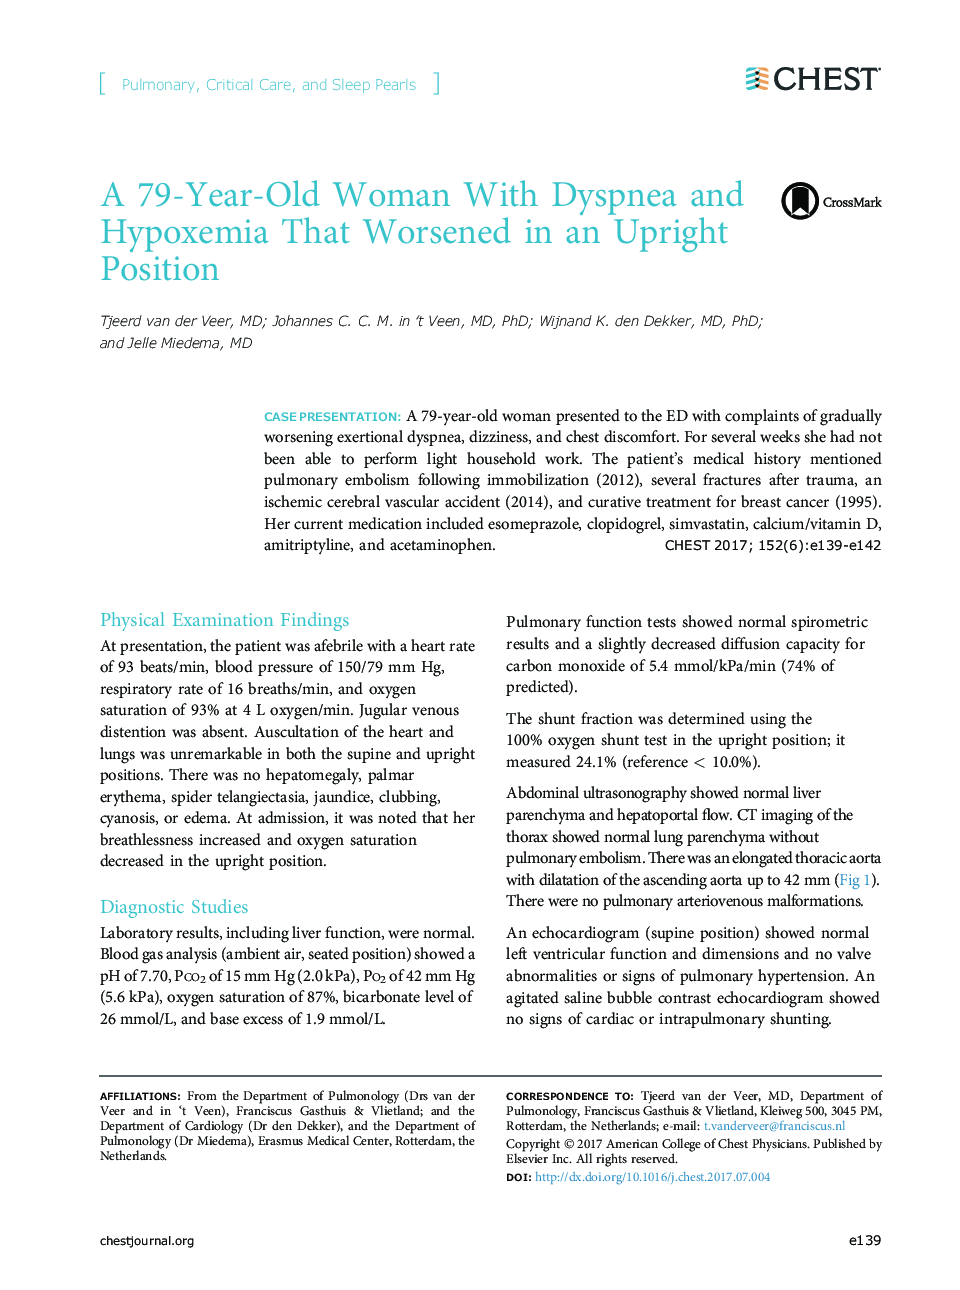 A 79-Year-Old Woman With Dyspnea and Hypoxemia That Worsened in an Upright Position